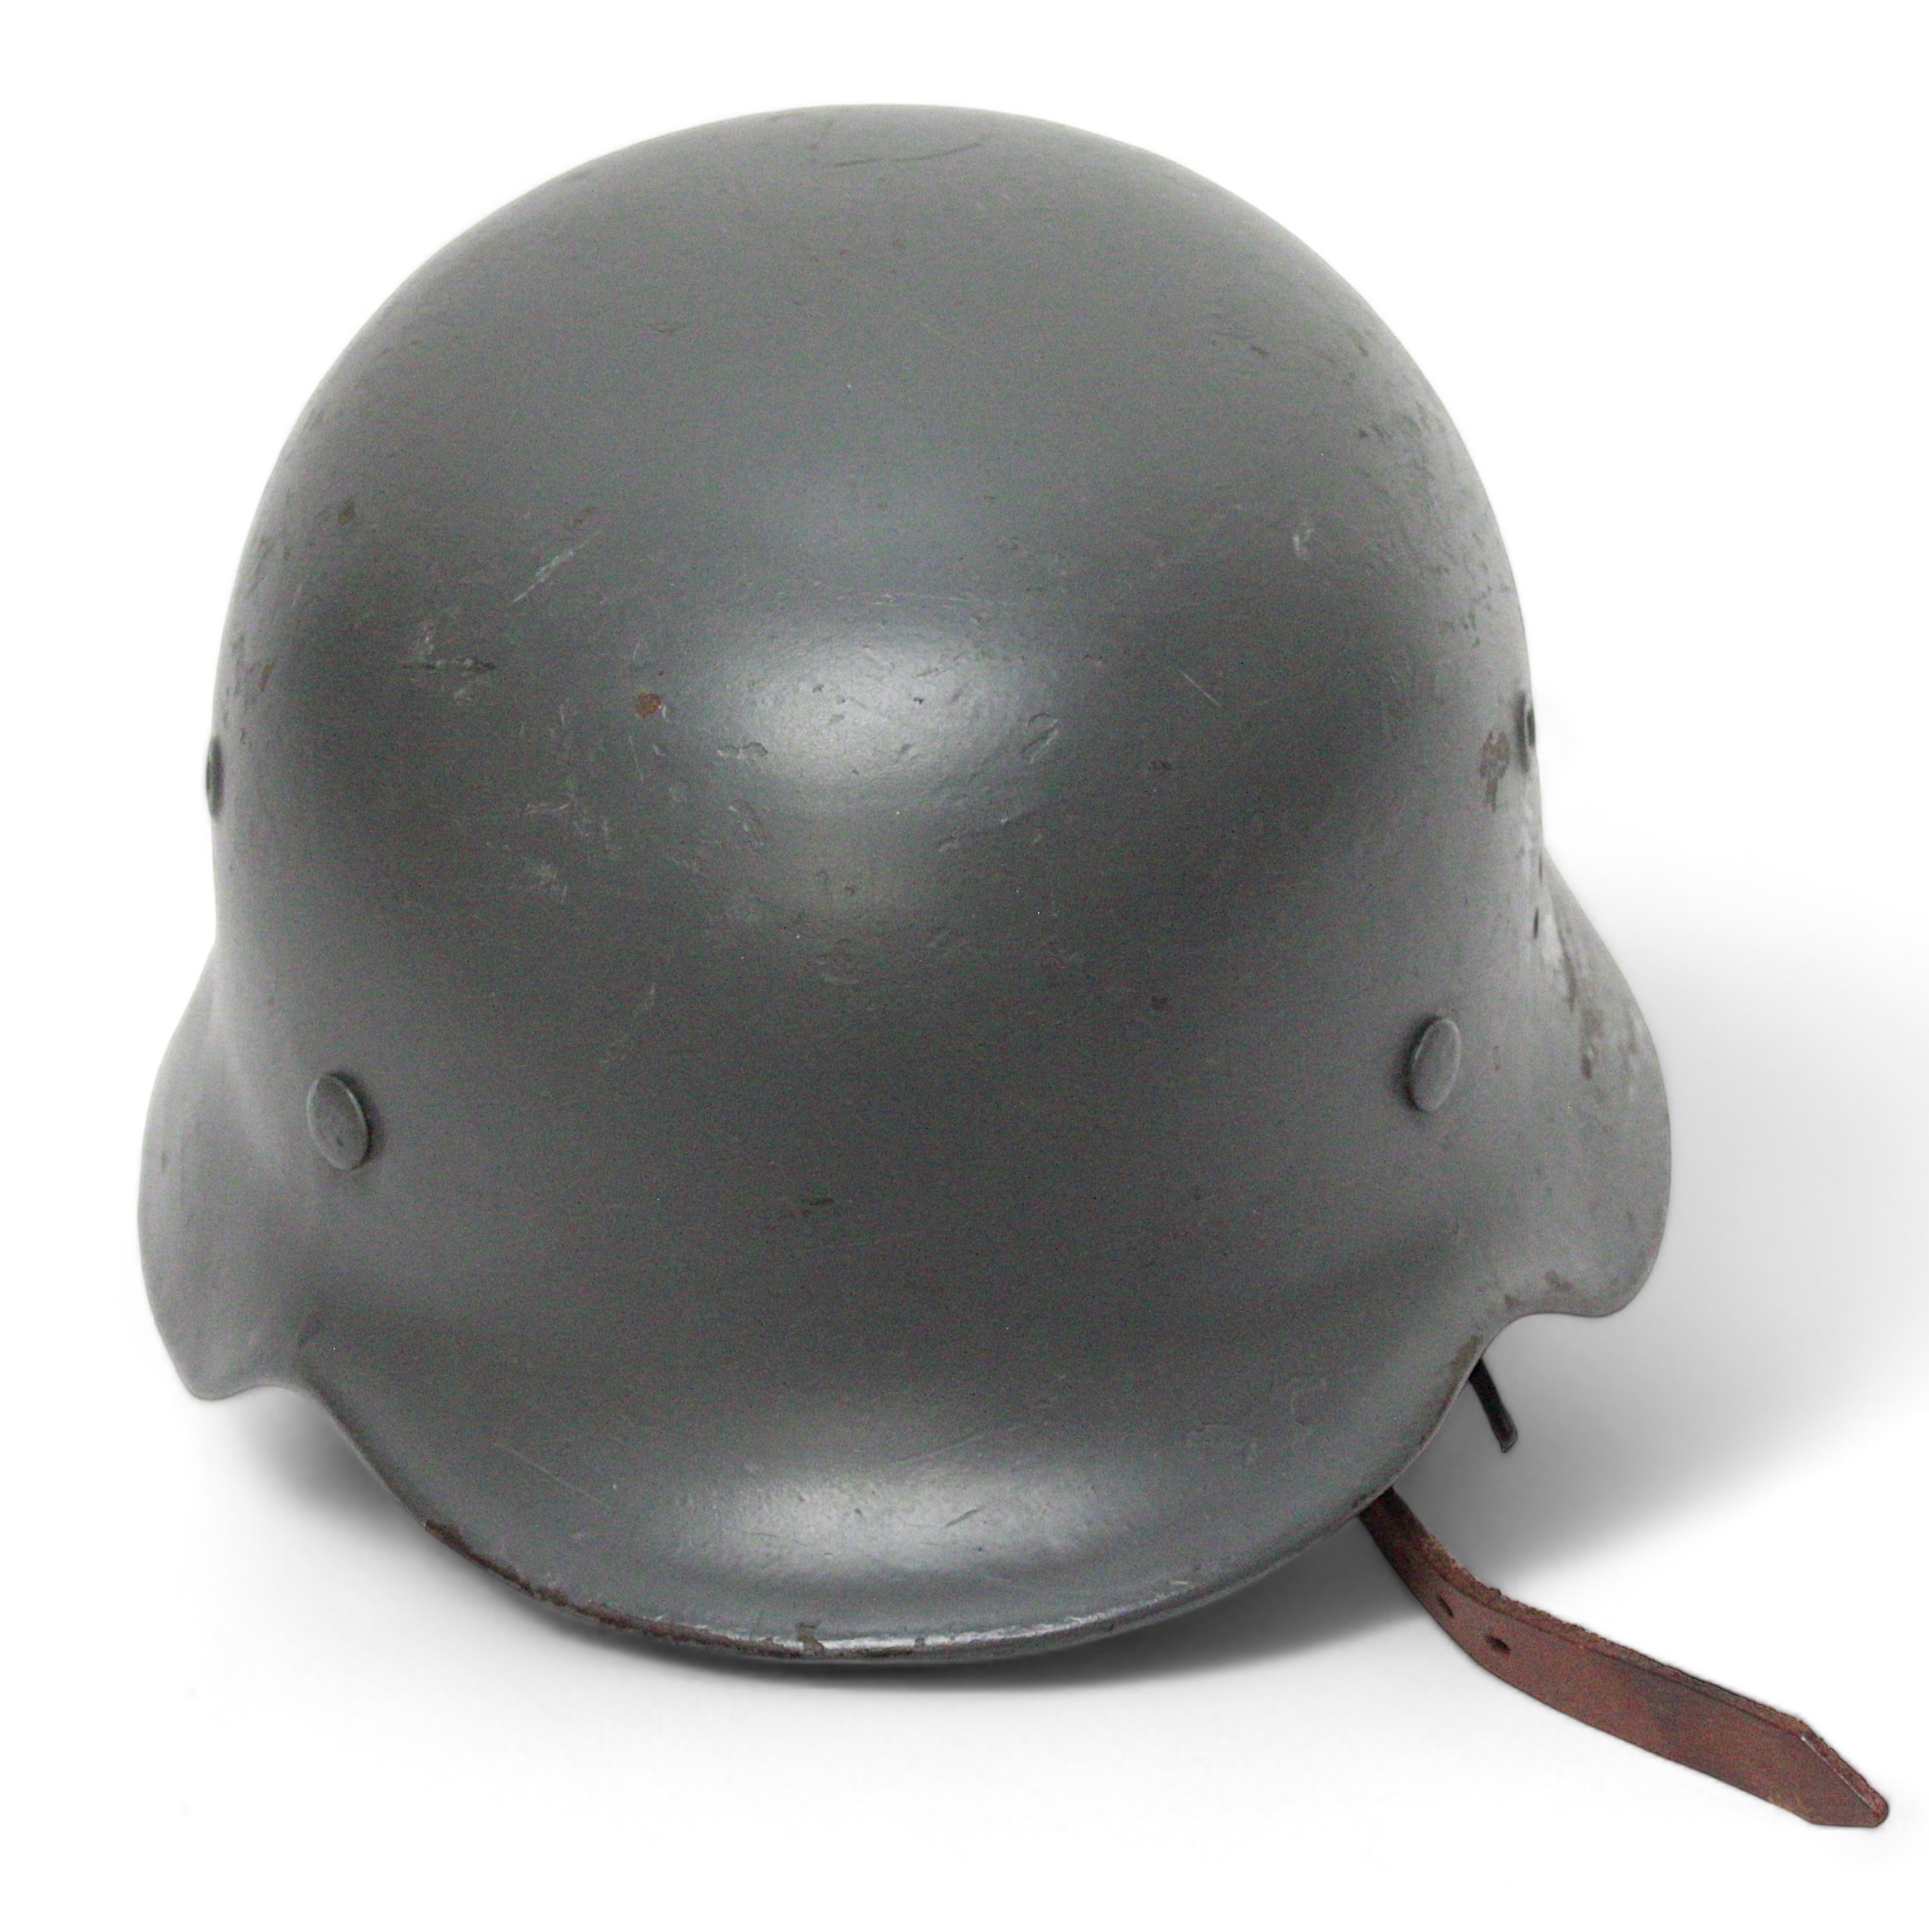 A WWII German Third Reich M40 Helmet, stamped SE64 / 7934, eight-tongue leather liner, size 57, grey